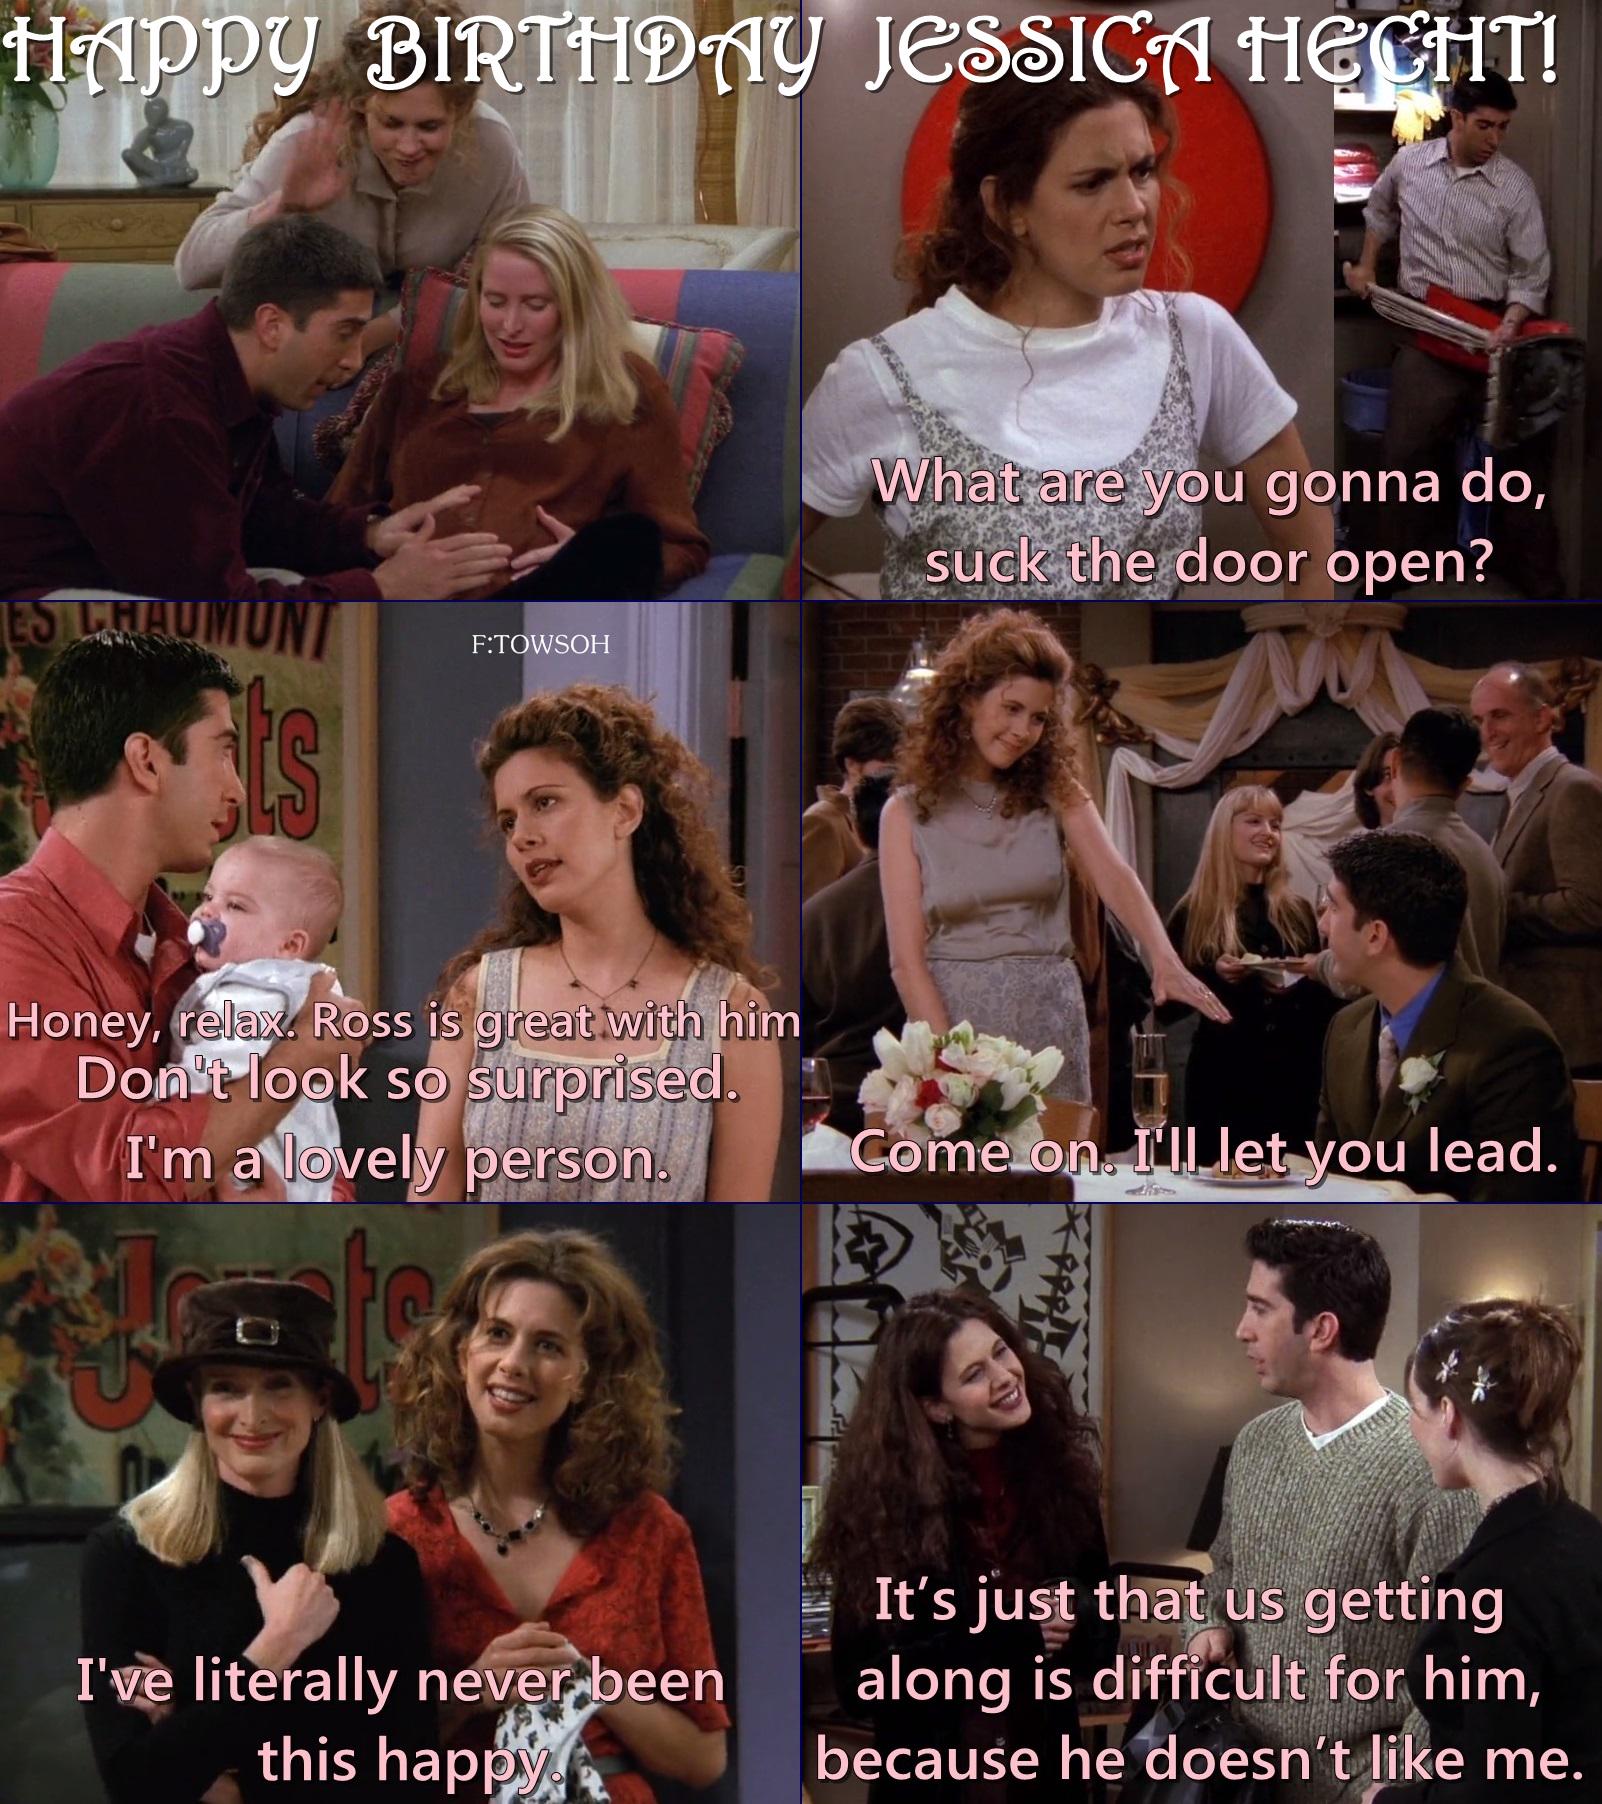 Wishing Jessica Hecht who played the role of Susan Bunch in FRIENDS a very happy birthday :)  